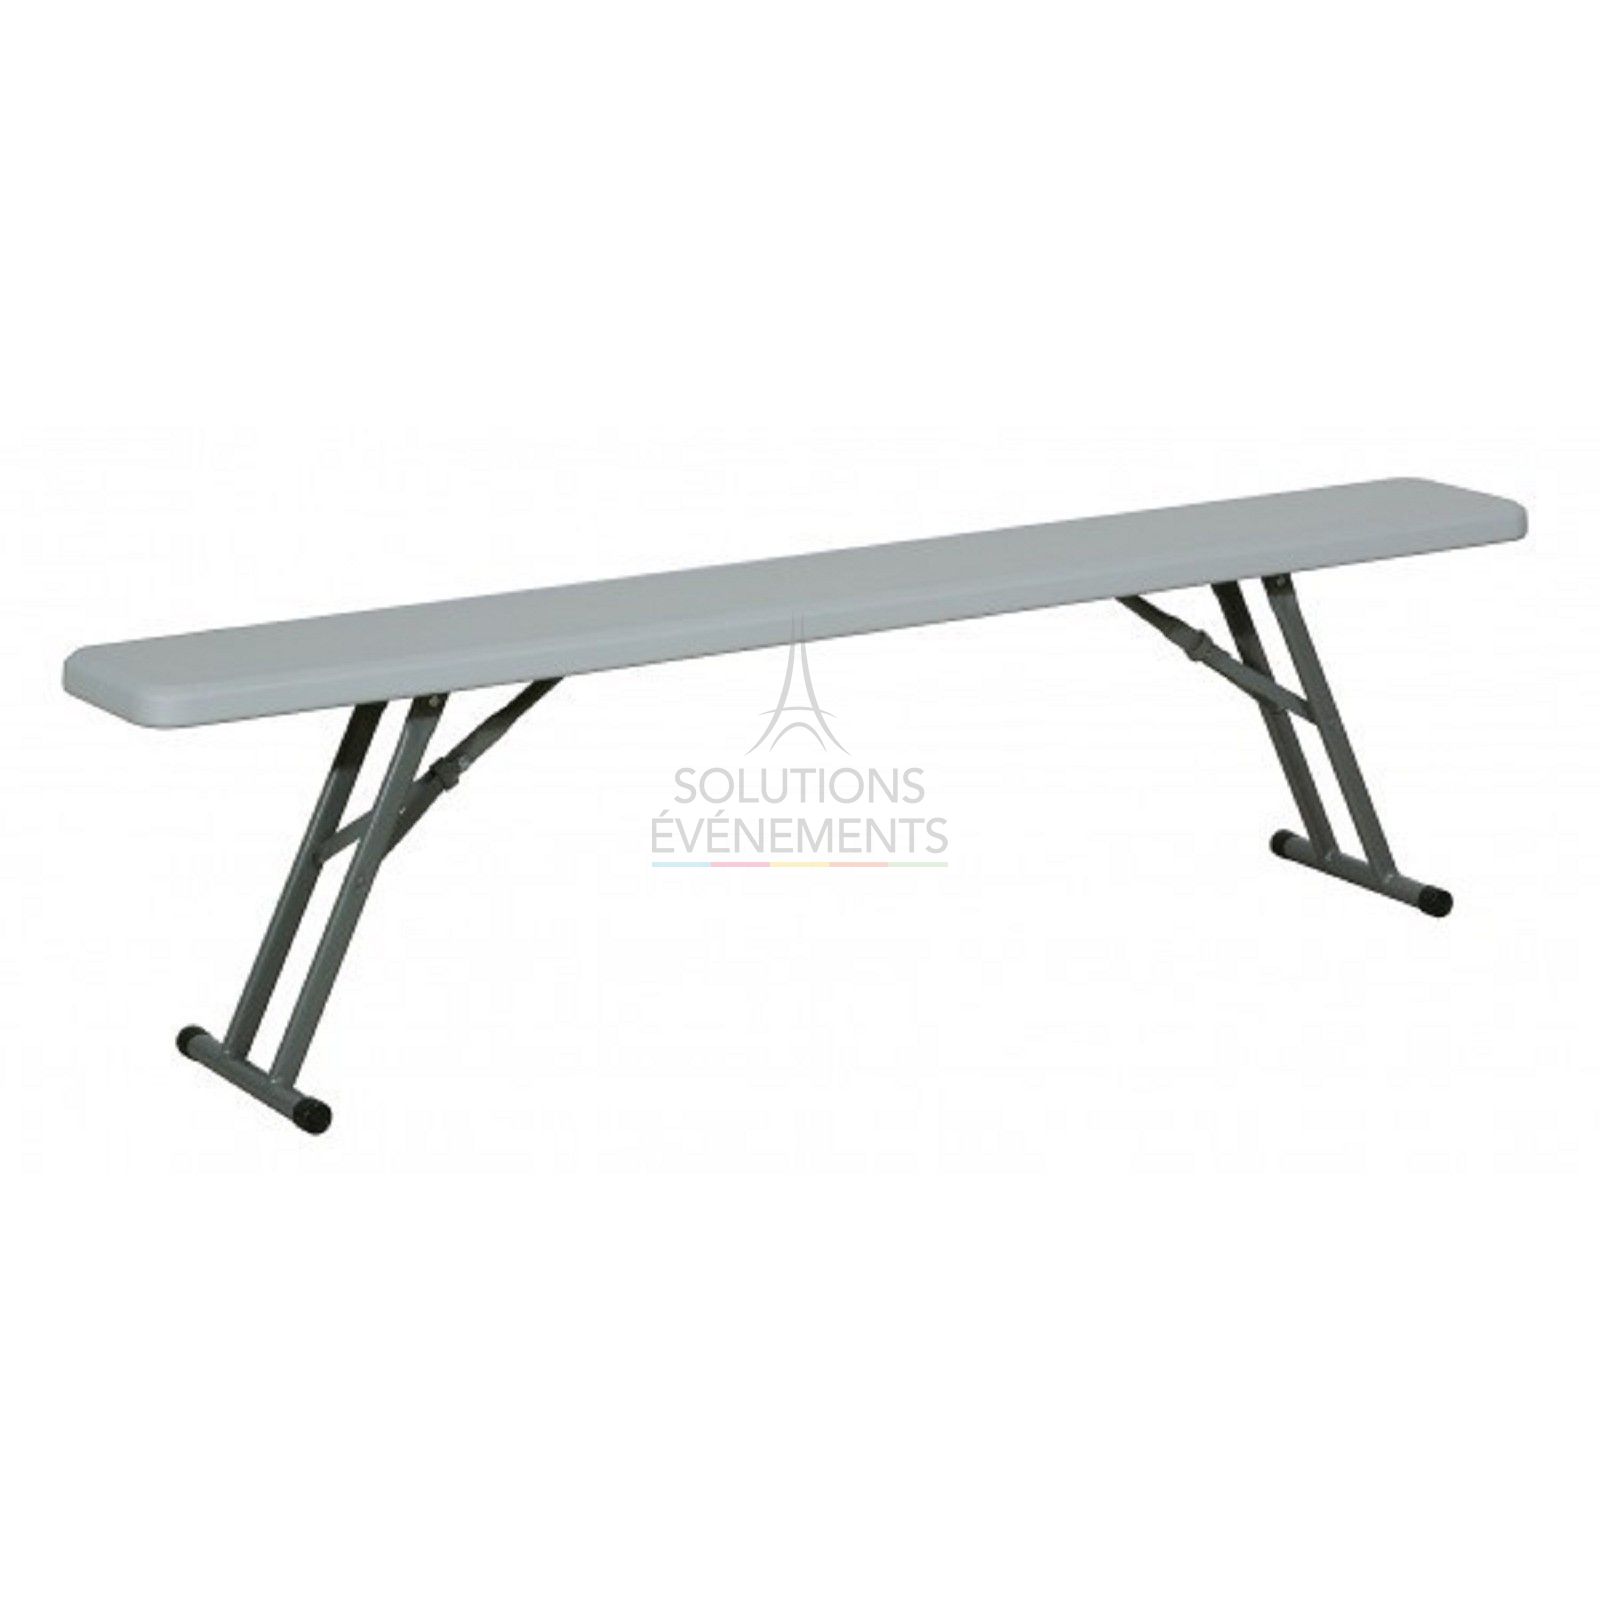 Rental of HPDE folding bench for banquet table seating